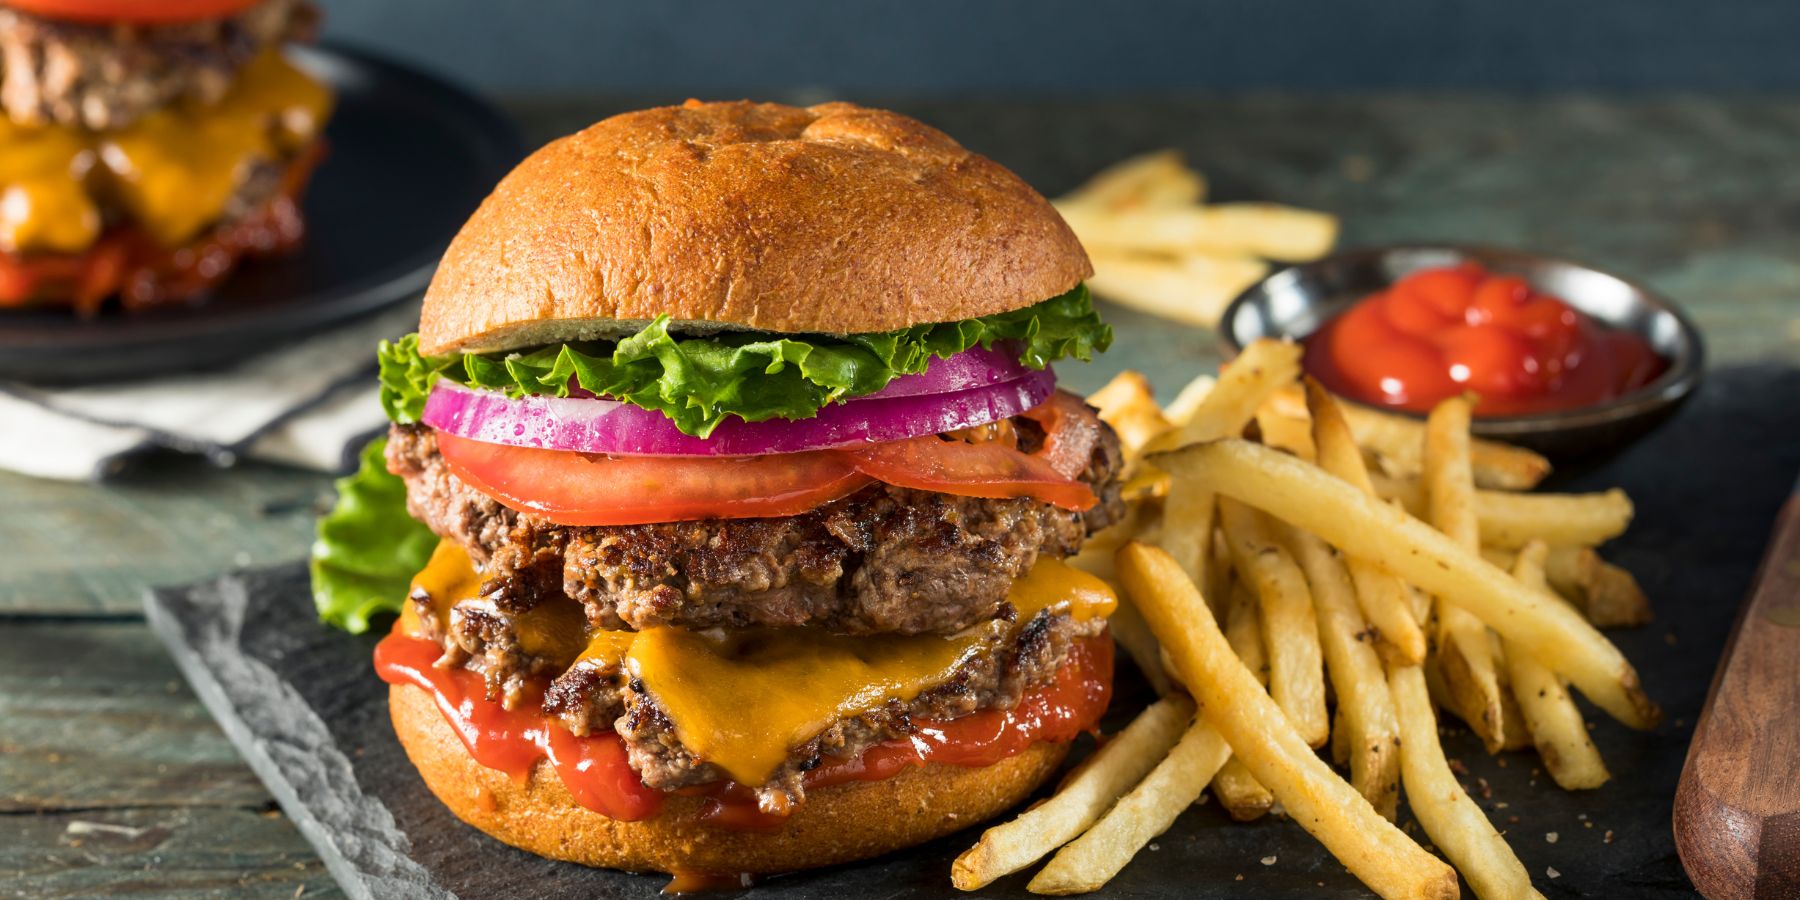 How do Burger Temperatures Impact Flavor and Texture? From Rare to Well-Done